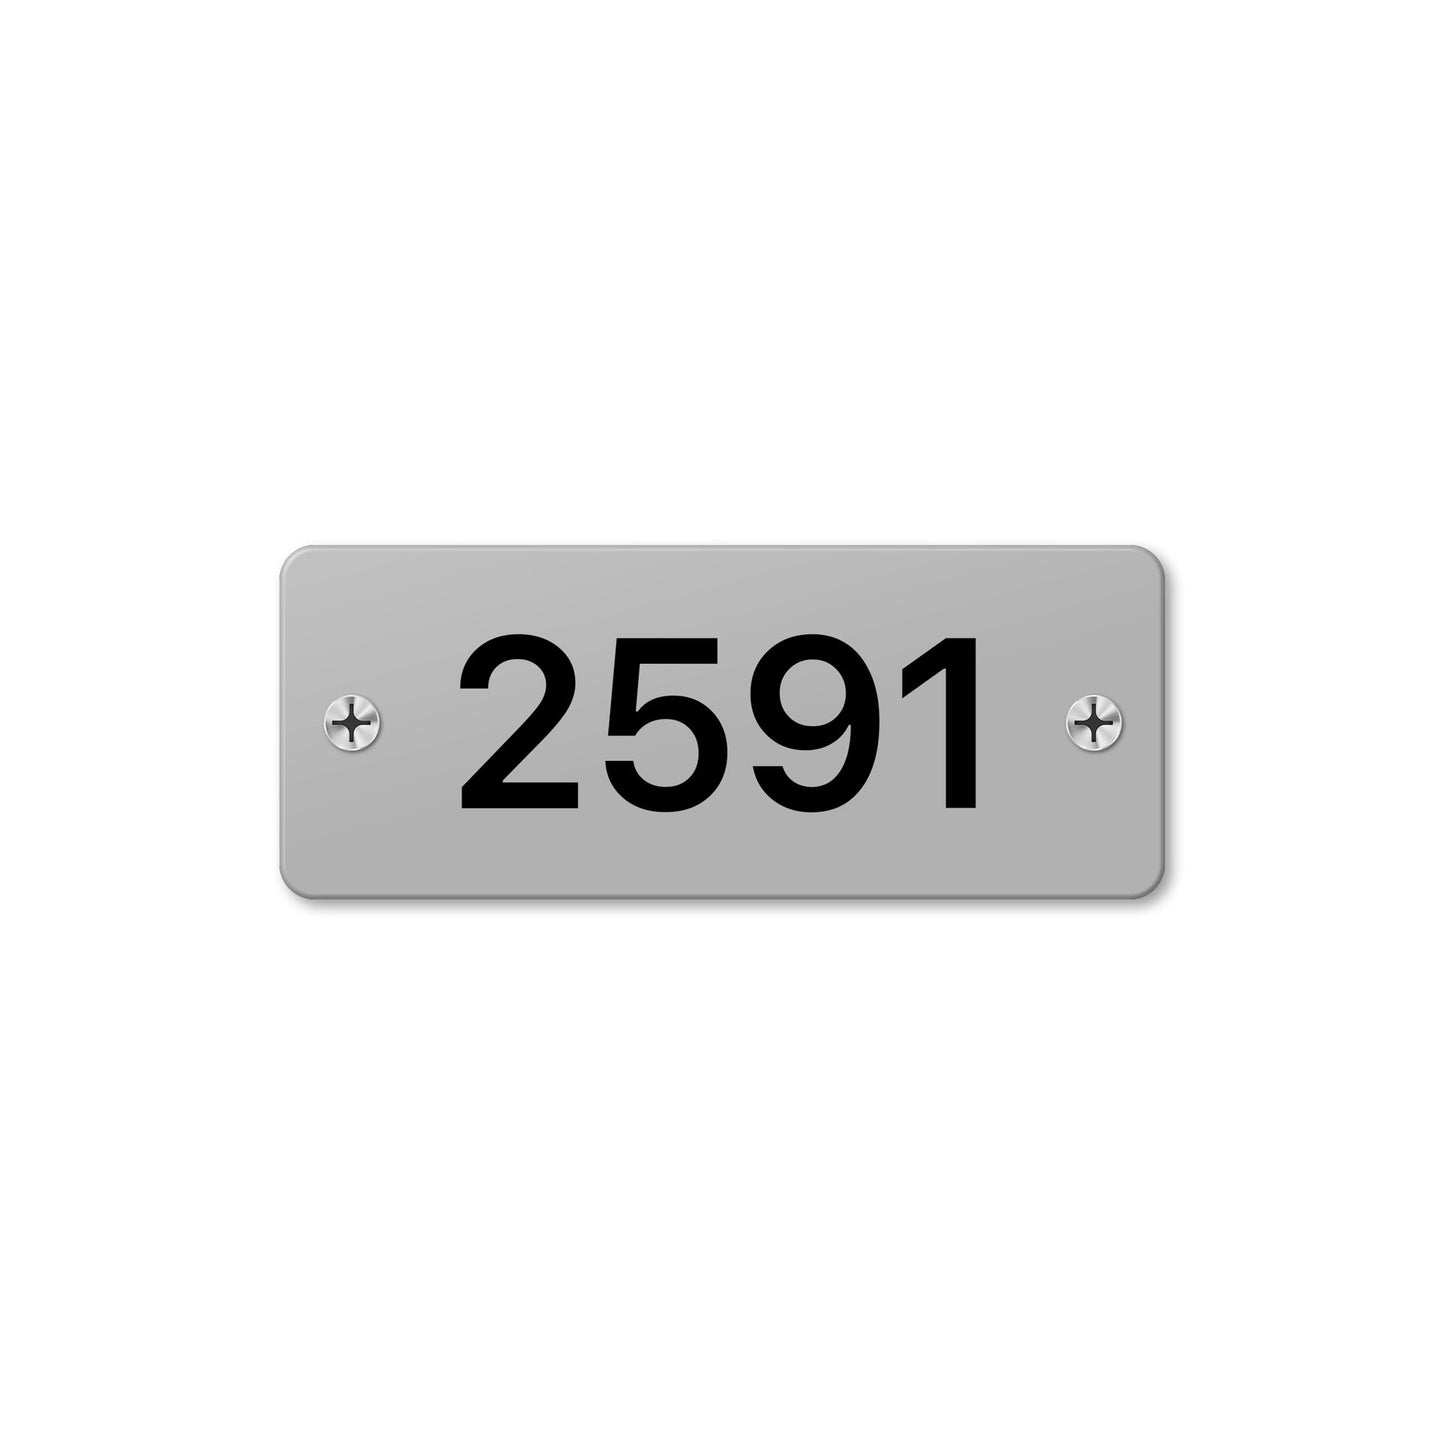 Numeral 2591